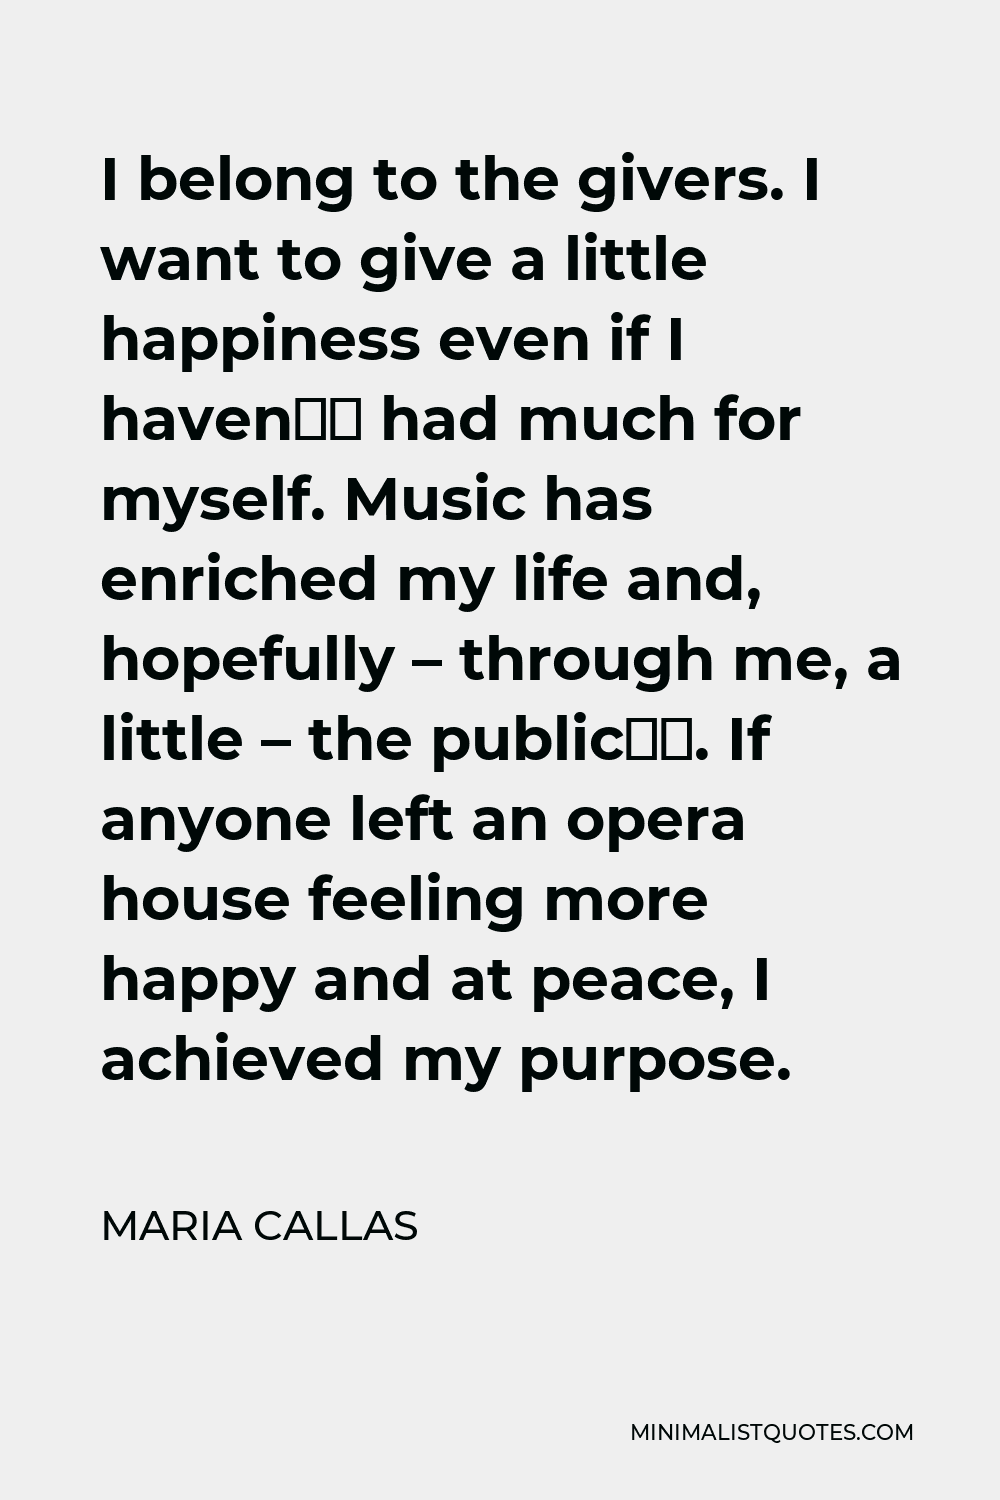 Maria Callas Quote - I belong to the givers. I want to give a little happiness even if I haven’t had much for myself. Music has enriched my life and, hopefully – through me, a little – the public’s. If anyone left an opera house feeling more happy and at peace, I achieved my purpose.